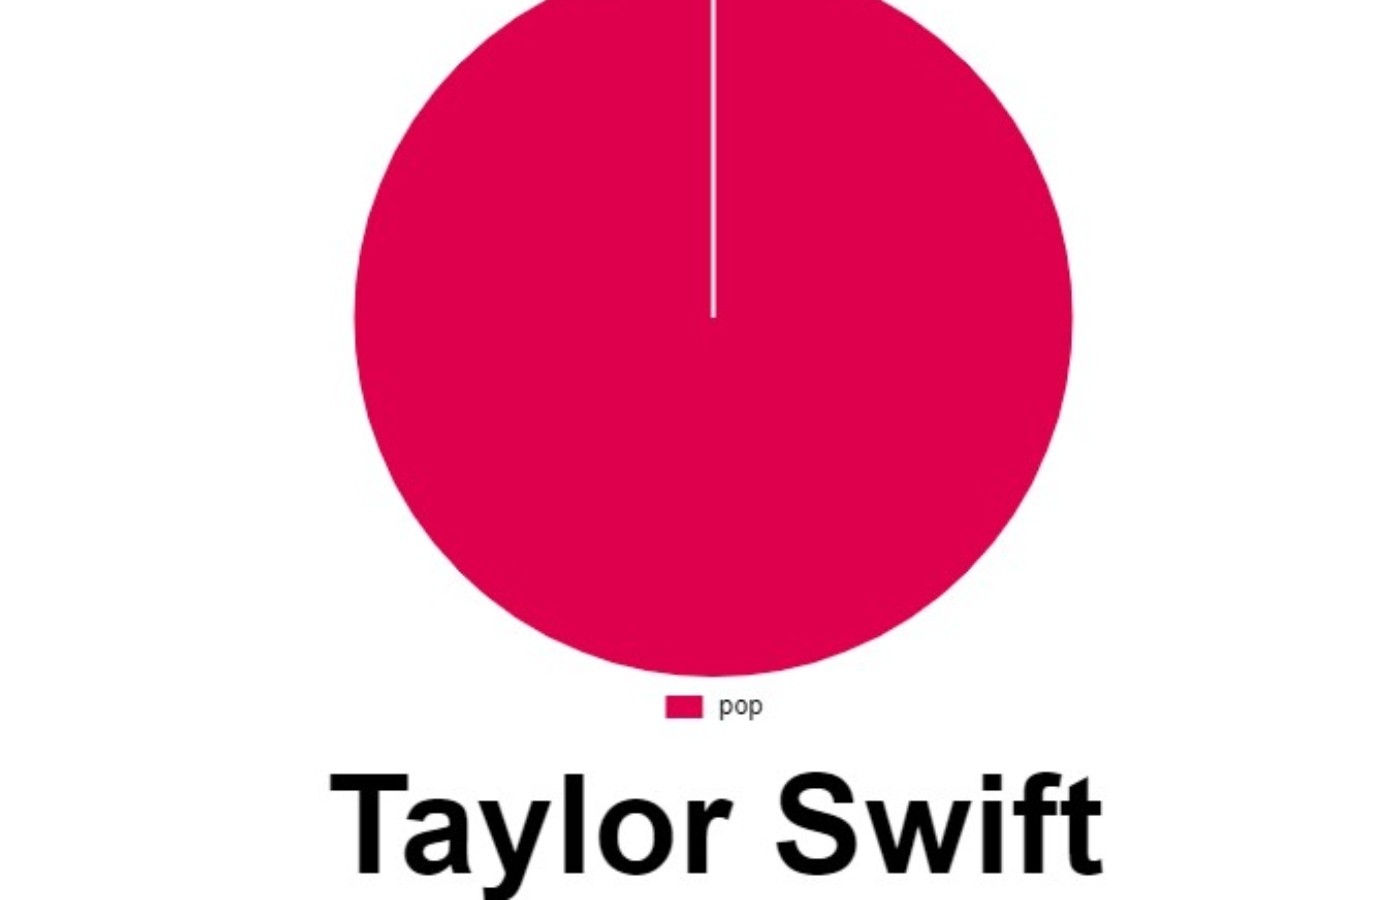 A Spotify Pie for a user who only listens to Taylor Swift.